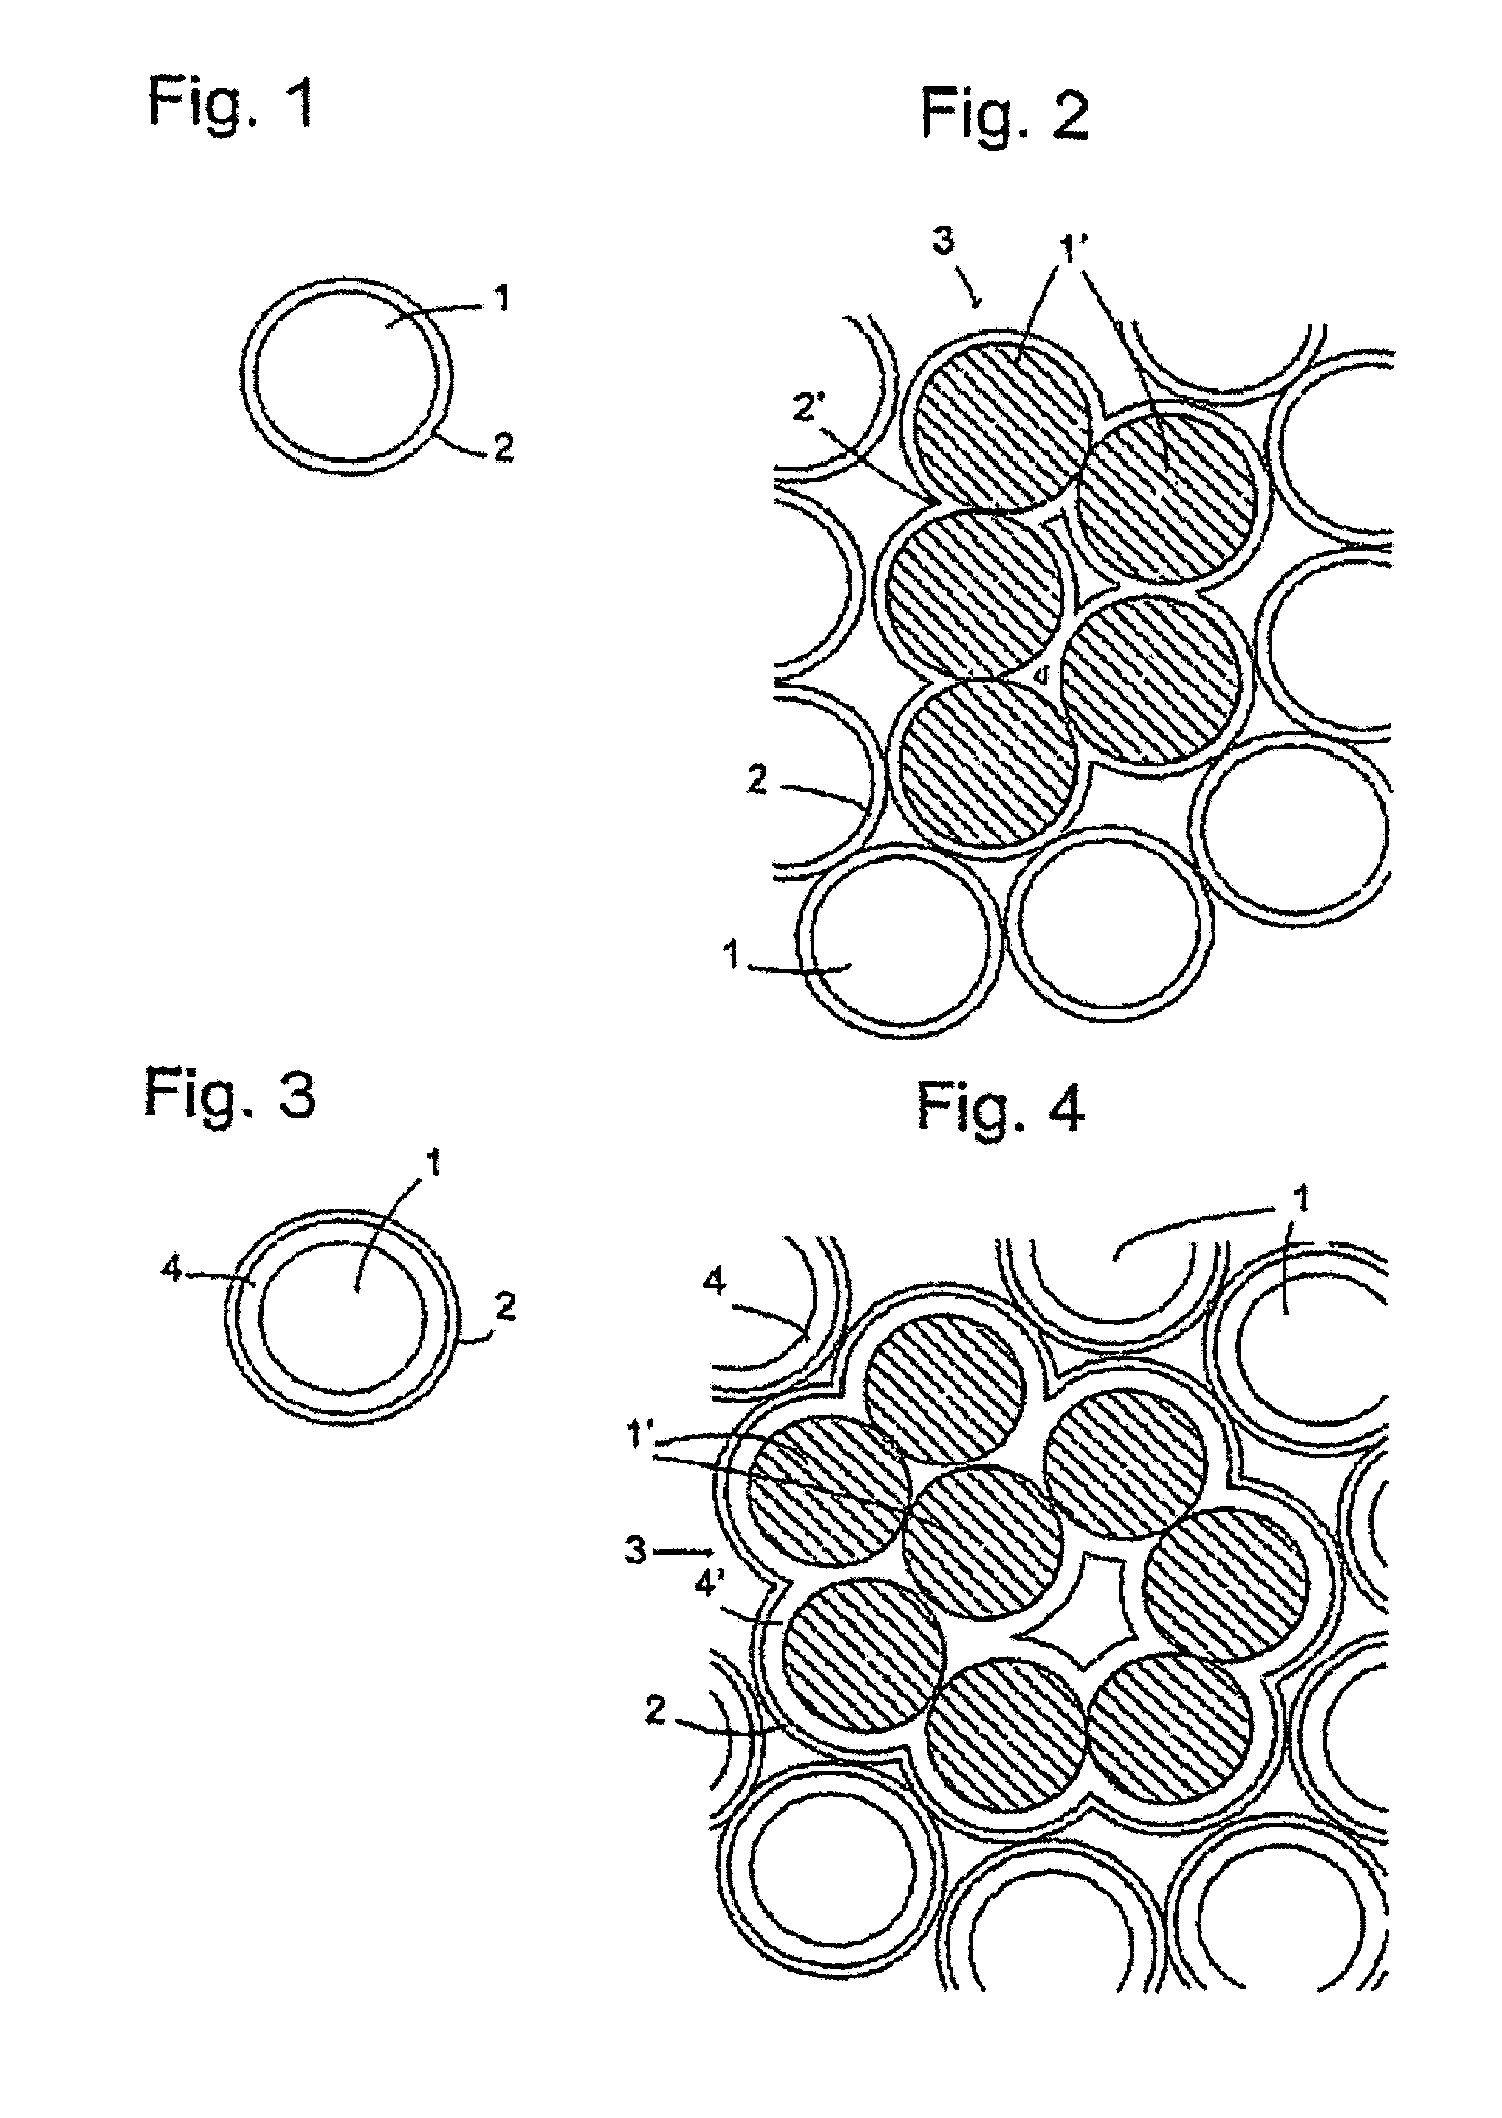 Polyvinyl butyral granular material for 3-D binder printing, production method and uses therefor